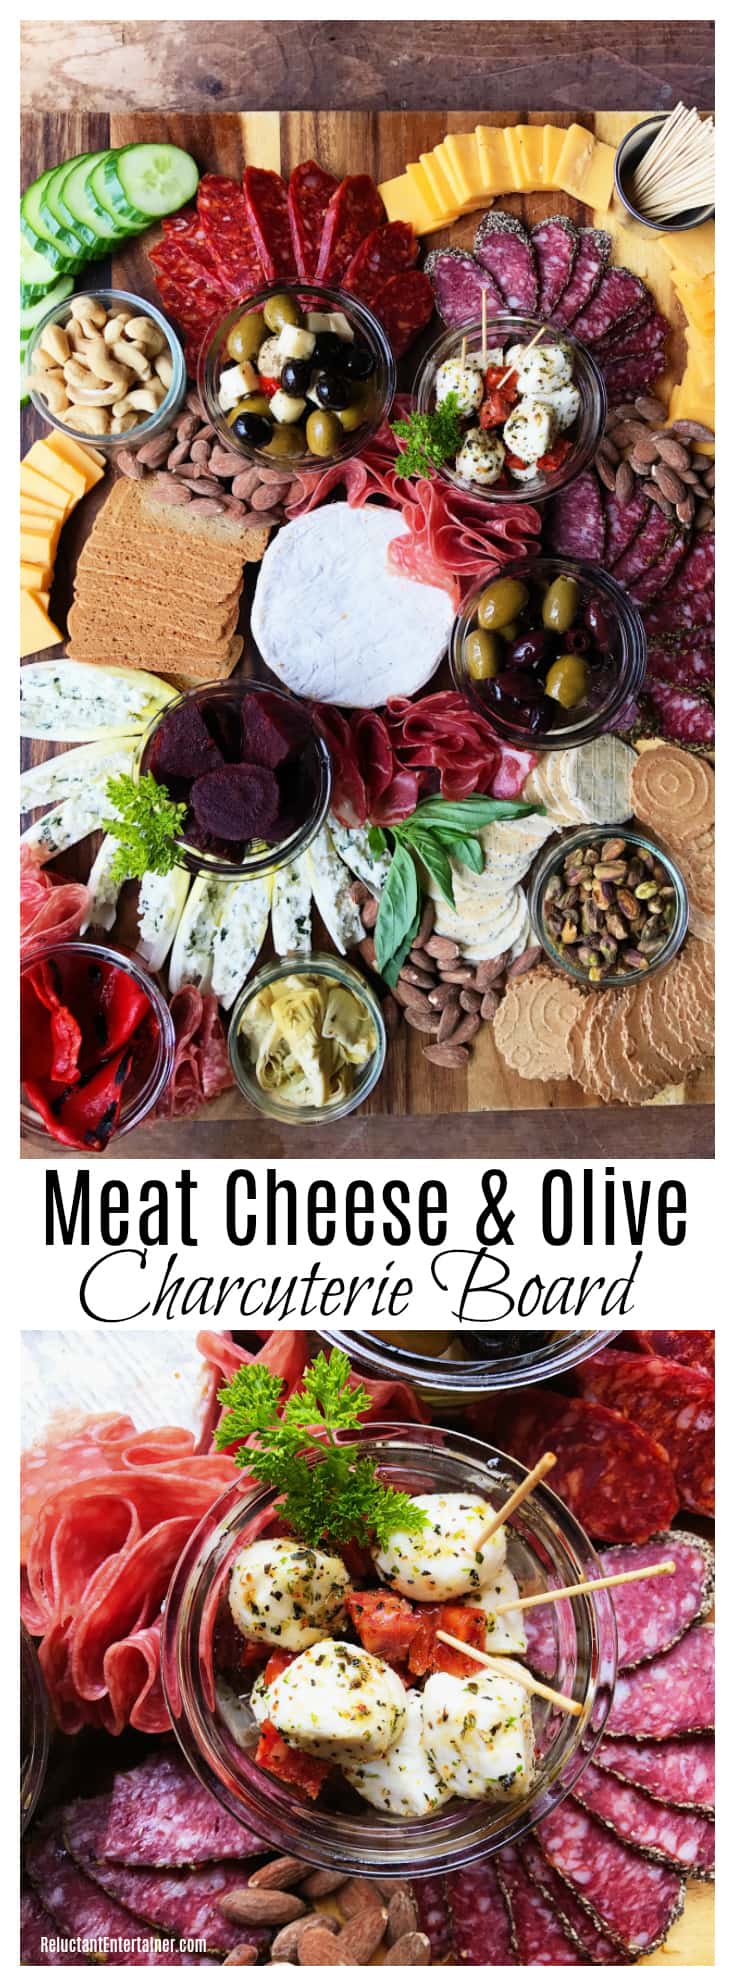 Meat Cheese & Olive Charcuterie Board - Reluctant Entertainer